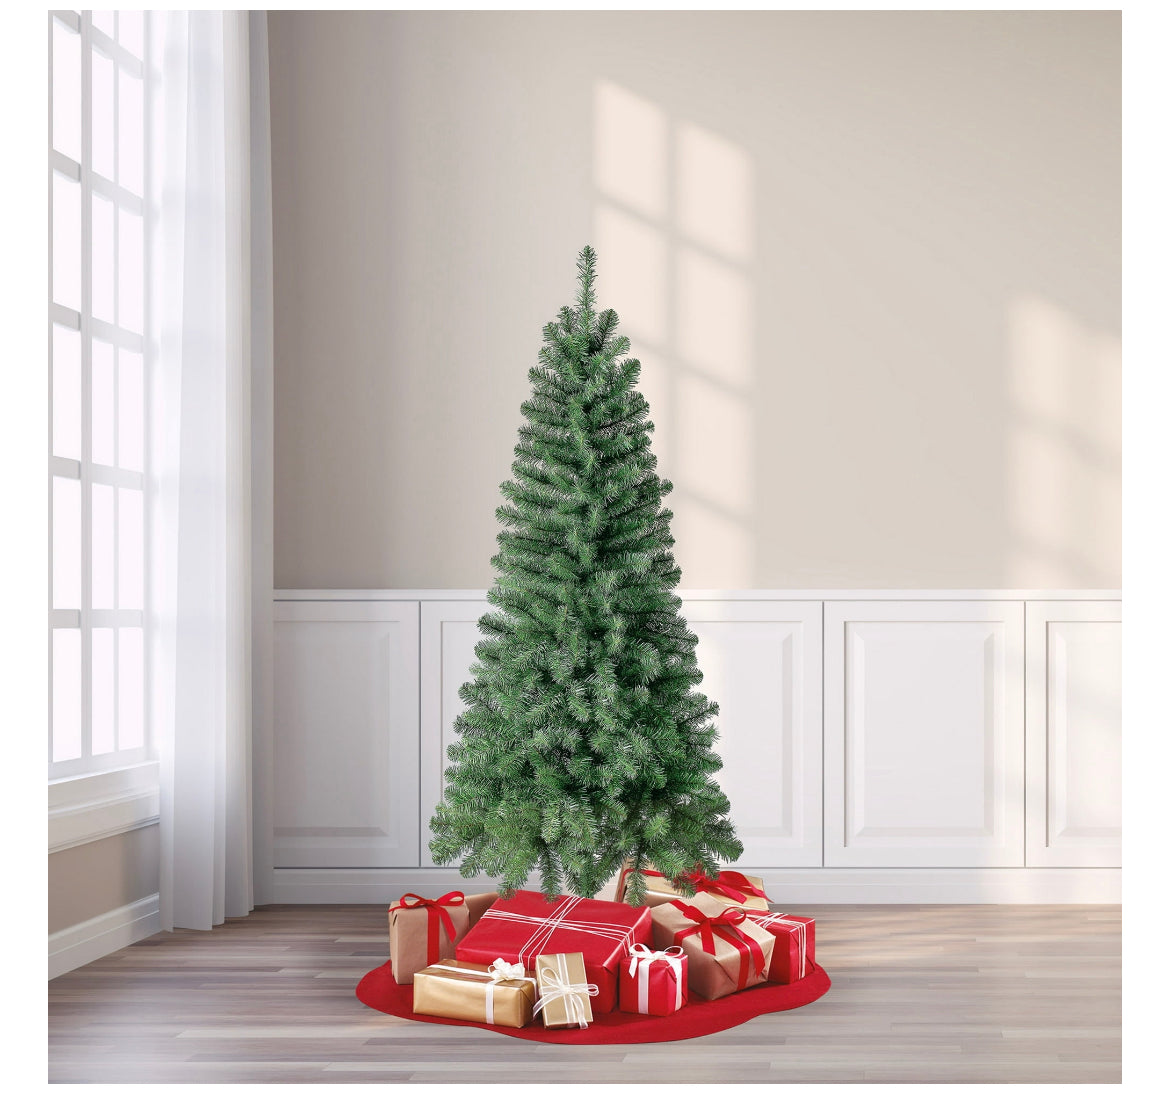 6 Foot Non-Lit Wesley Pine Green Christmas Tree 54070